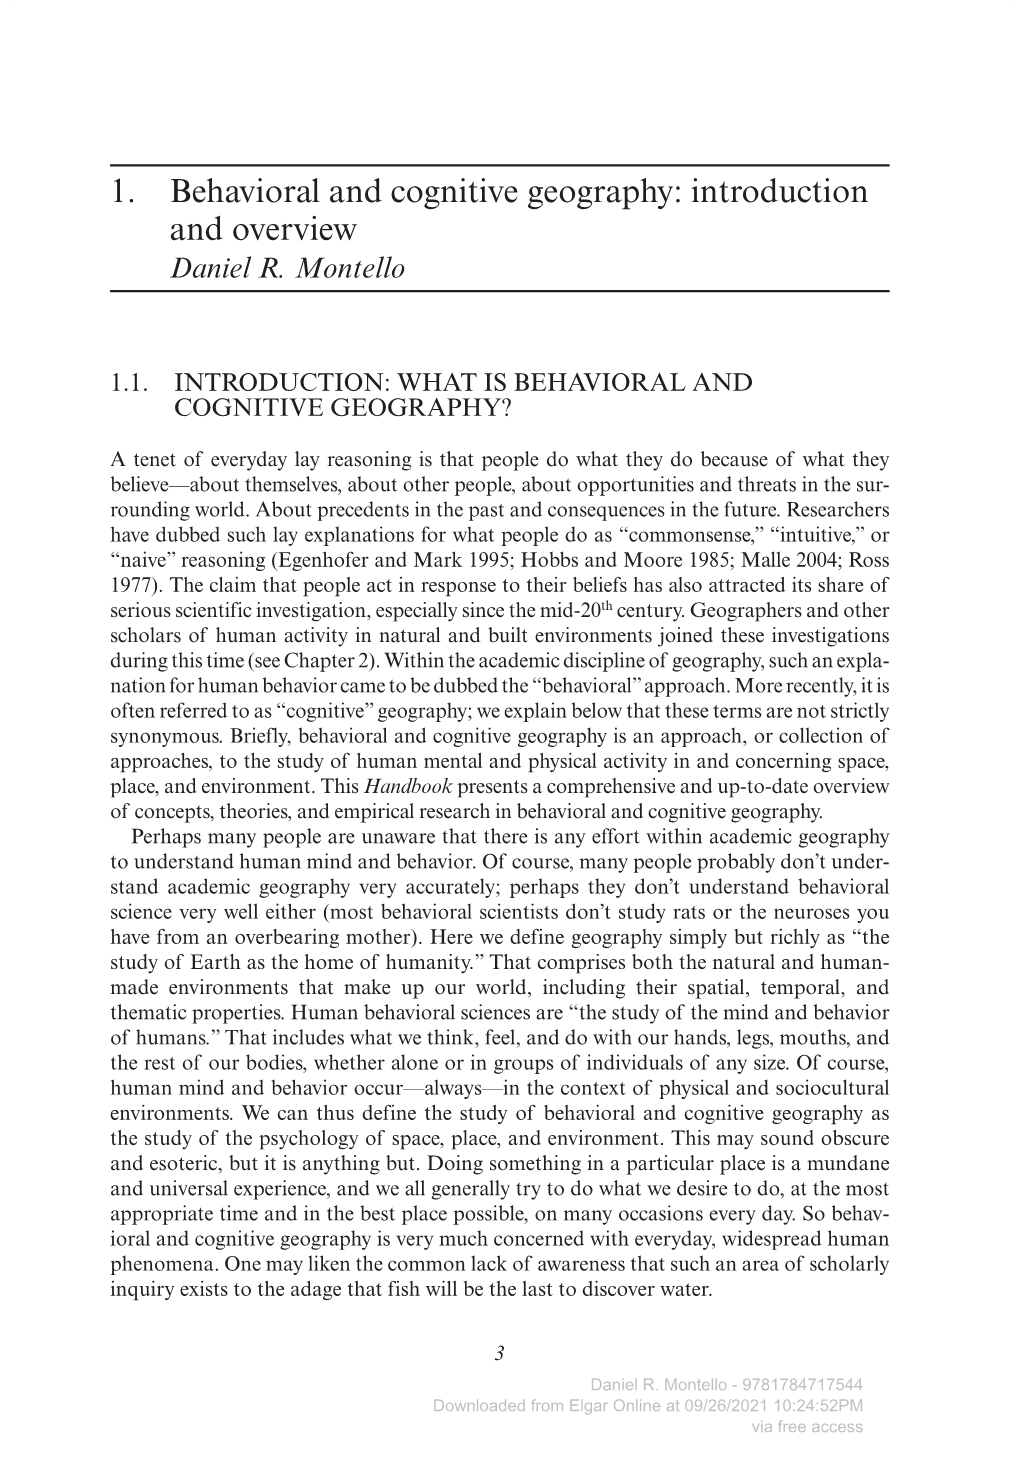 MONTELLO 9781784717537 PRINT (4Col).Indd 3 13/03/2018 15:21 4 Handbook of Behavioral and Cognitive Geography